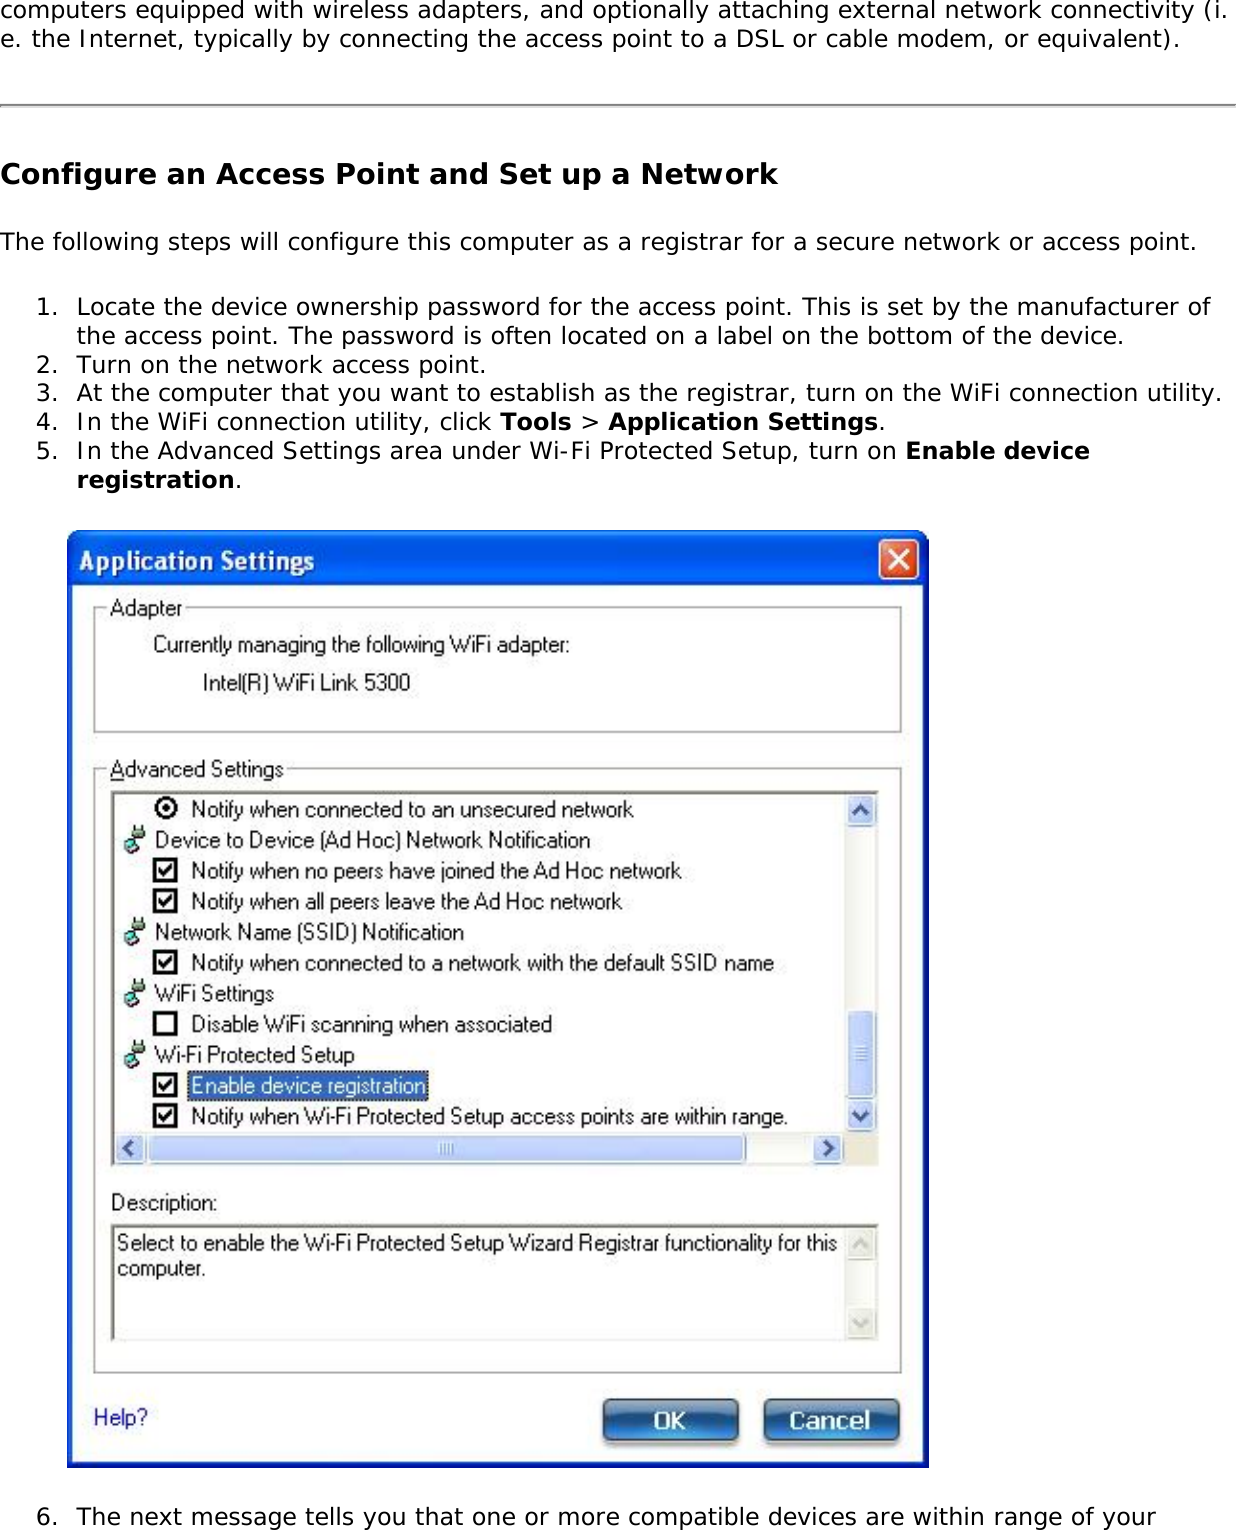 computers equipped with wireless adapters, and optionally attaching external network connectivity (i.e. the Internet, typically by connecting the access point to a DSL or cable modem, or equivalent).Configure an Access Point and Set up a NetworkThe following steps will configure this computer as a registrar for a secure network or access point.1.  Locate the device ownership password for the access point. This is set by the manufacturer of the access point. The password is often located on a label on the bottom of the device.2.  Turn on the network access point.3.  At the computer that you want to establish as the registrar, turn on the WiFi connection utility.4.  In the WiFi connection utility, click Tools &gt; Application Settings. 5.  In the Advanced Settings area under Wi-Fi Protected Setup, turn on Enable device registration.6.  The next message tells you that one or more compatible devices are within range of your 